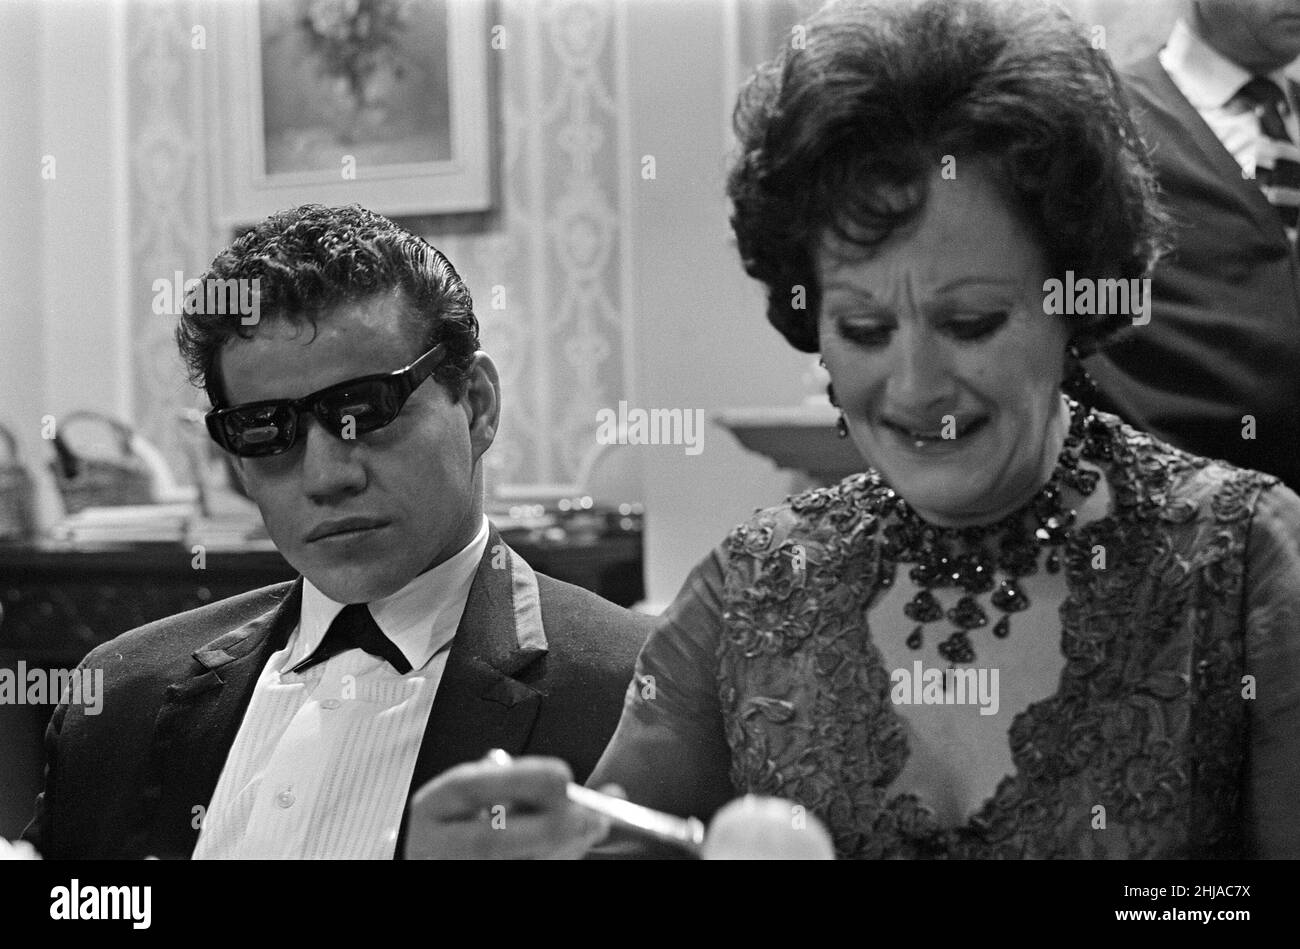 Filming on the set of the film 'Darling'. Unidentified man on the left, and Fanny Cradock on the right.   Darling is a 1965 British drama film written by Frederic Raphael, directed by John Schlesinger, and starring Julie Christie with Dirk Bogarde and Laurence Harvey.  Darling was nominated for five Academy Awards, including Best Picture and Best Director. Christie won the Academy Award for Best Actress for her performance as Diana Scott. The film also won the Academy Awards for Best Original Screenplay and Best Costume Design.  Picture taken 16th December 1964 Stock Photo